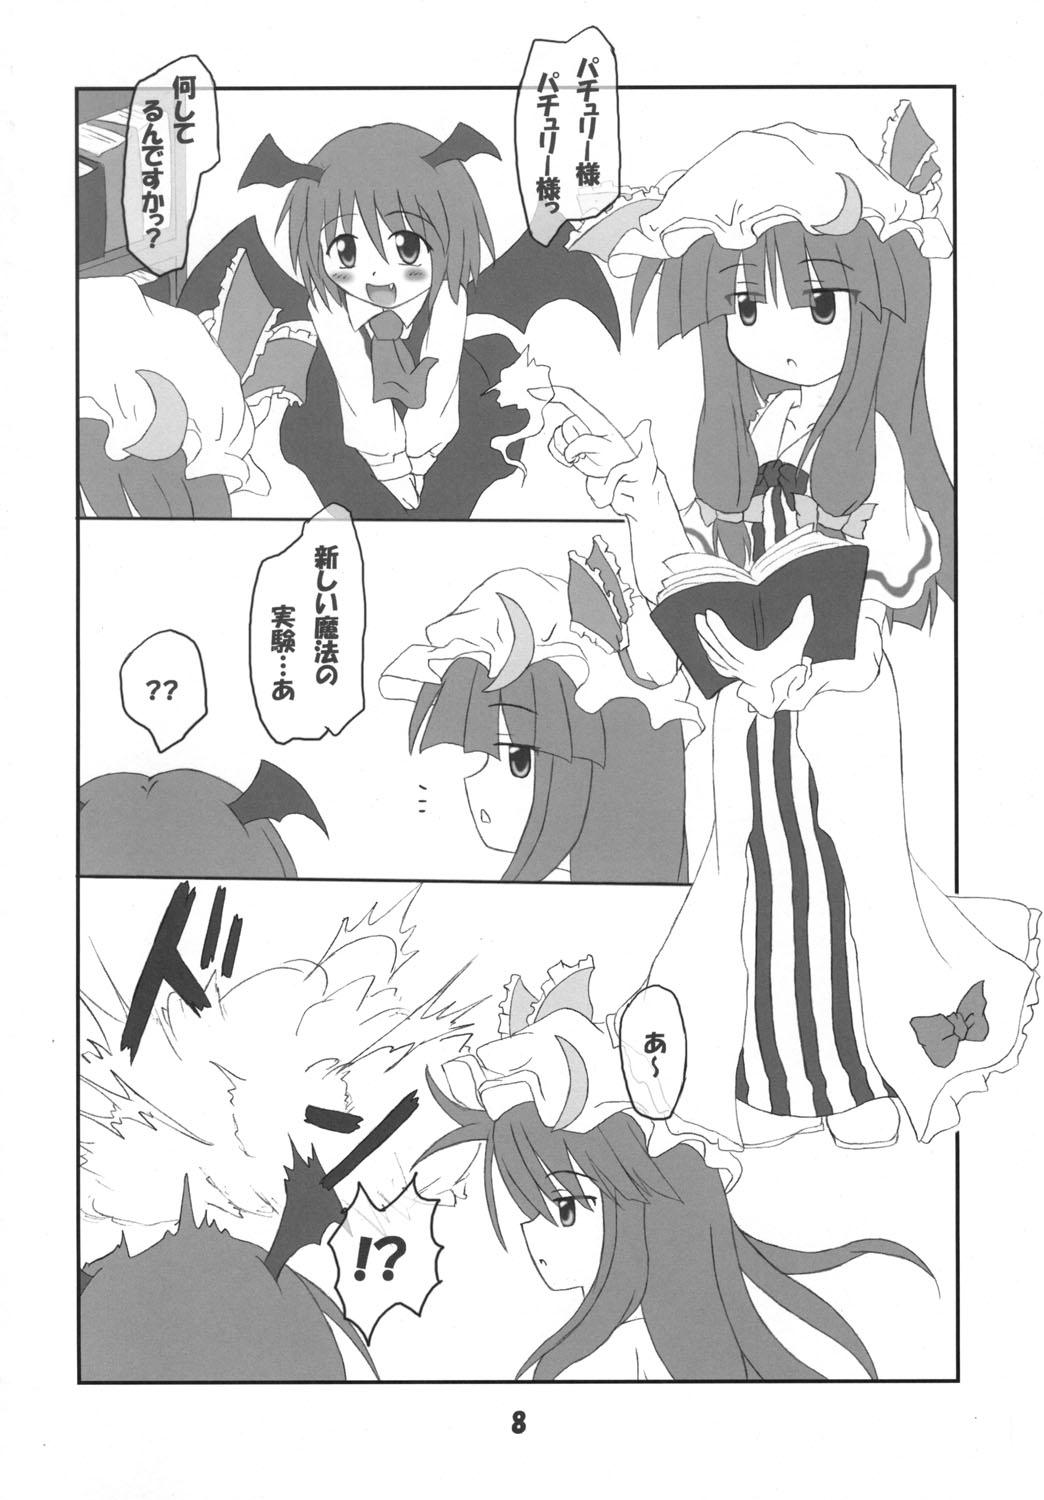 Bribe Rollin 18 - Touhou project Raw - Page 7